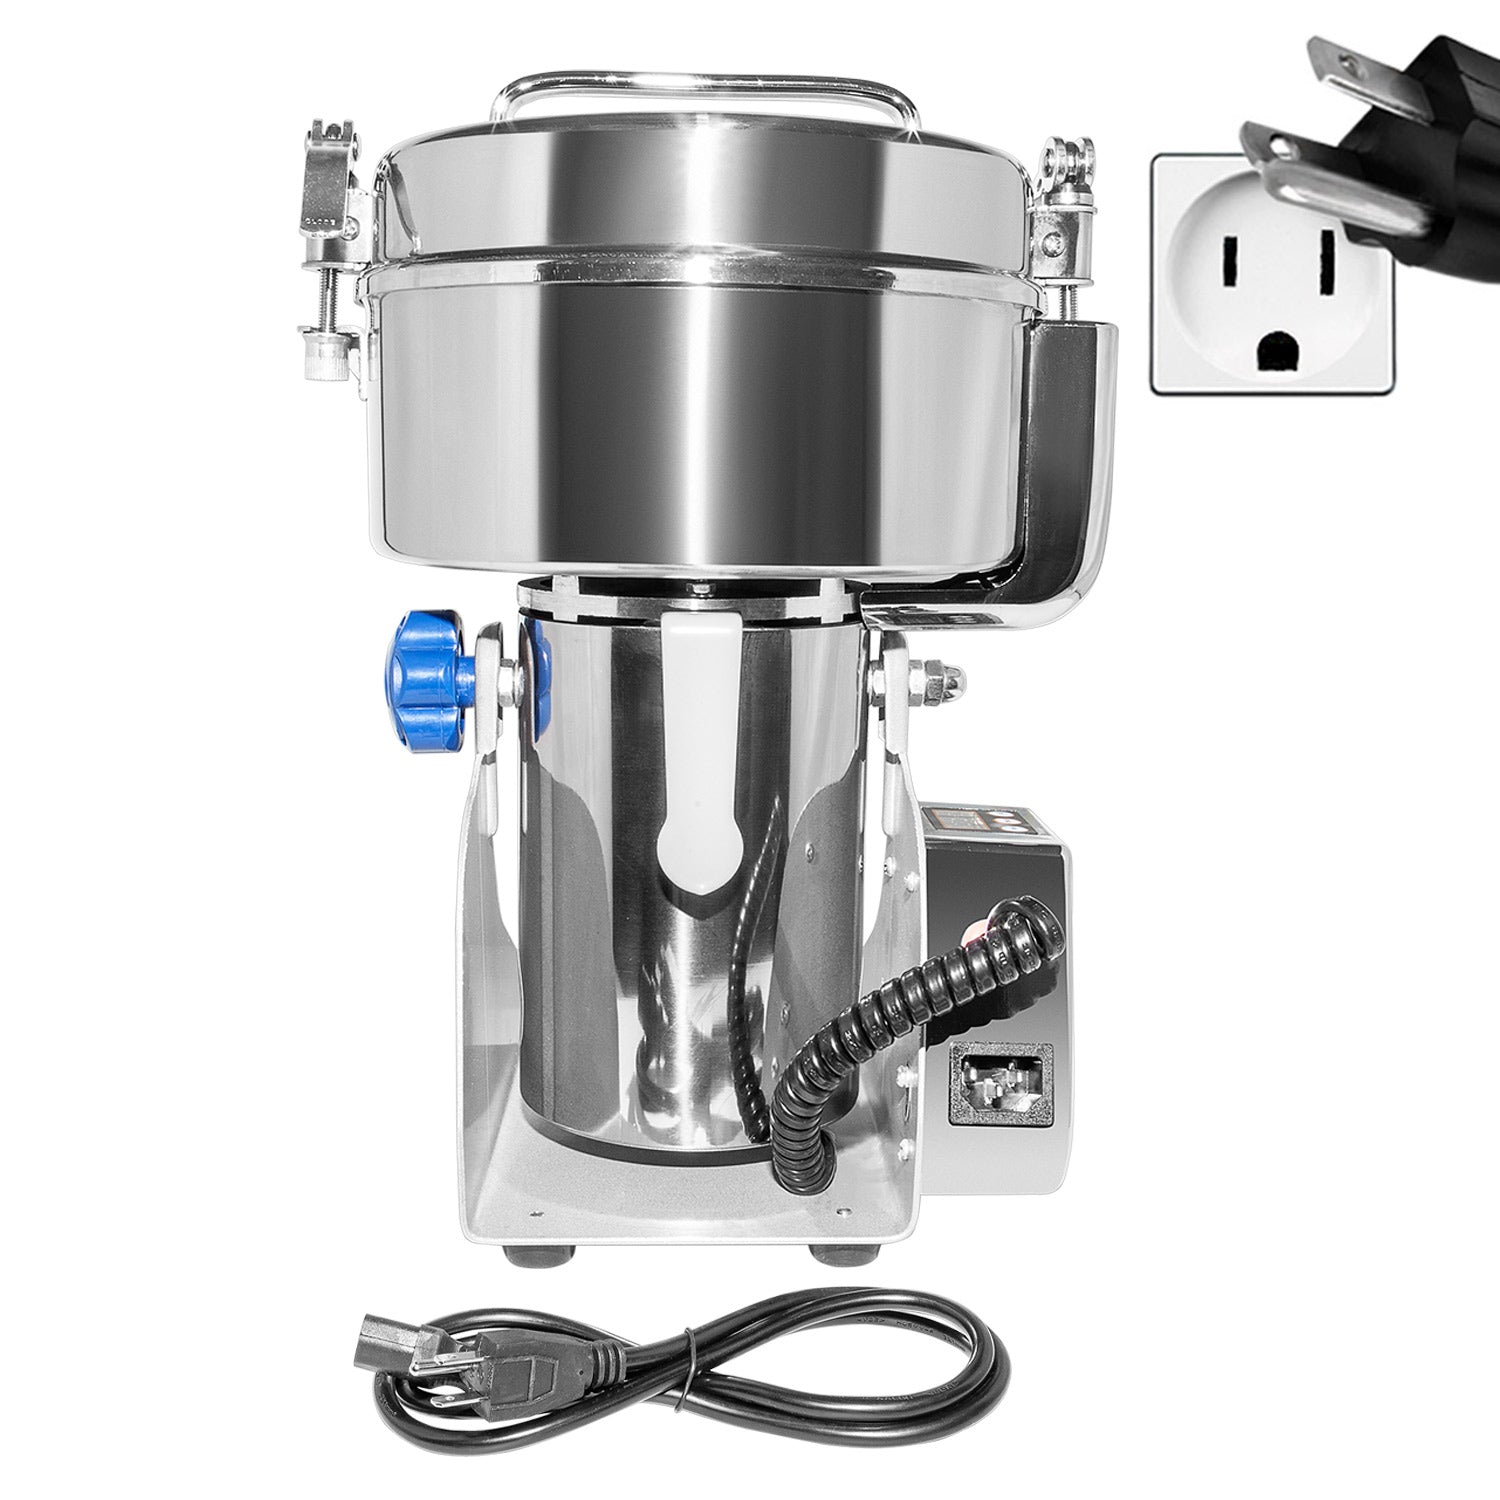 ALDKitchen Electric Grain Mill Commercial | 1000g | Swing Type Grain Grinder Mill | Stainless Steel 110V